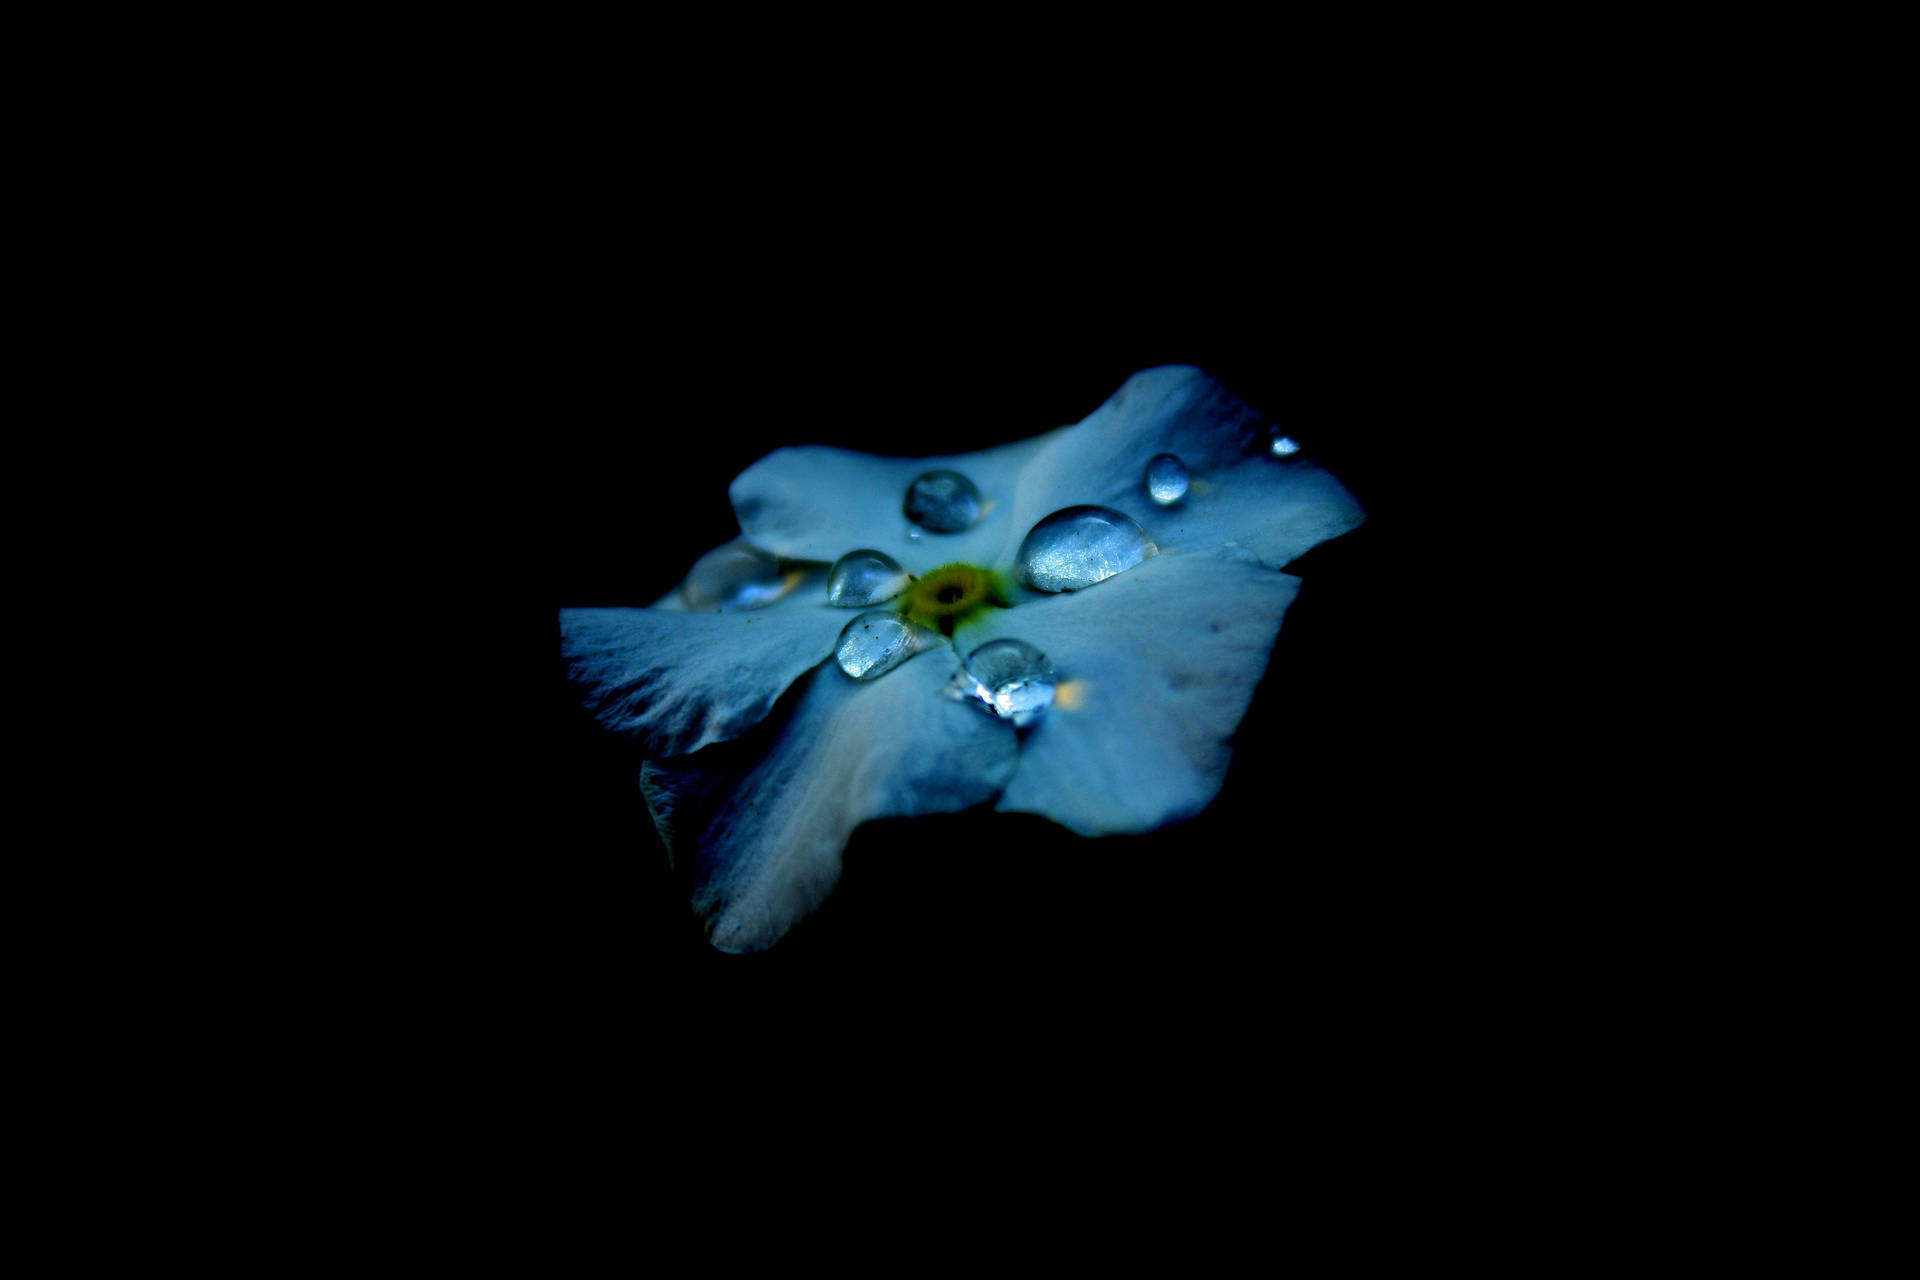 The Beauty Of Life Revealed Through Amoled Blue Flower Droplets Wallpaper